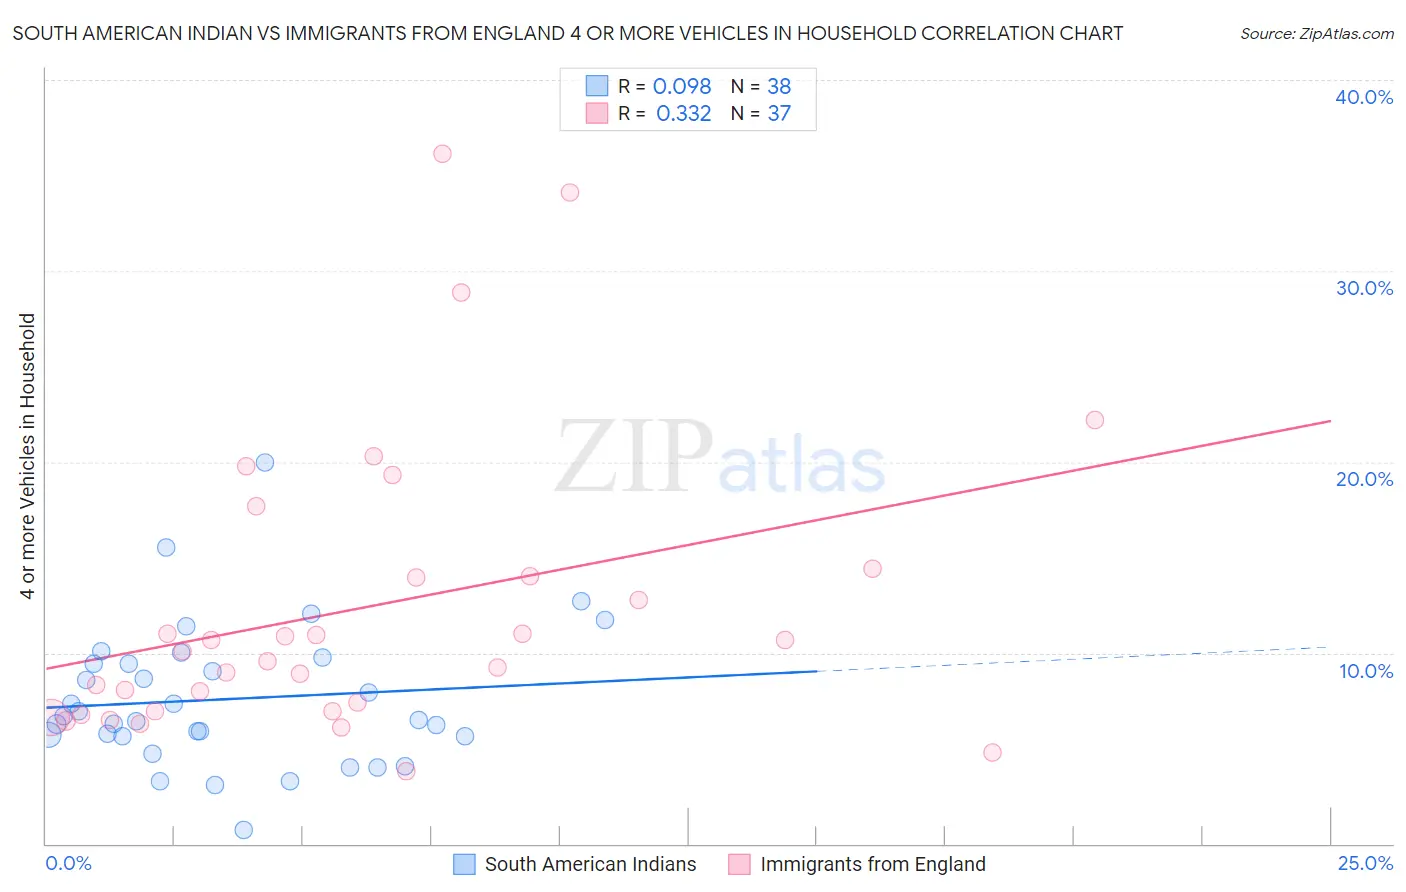 South American Indian vs Immigrants from England 4 or more Vehicles in Household